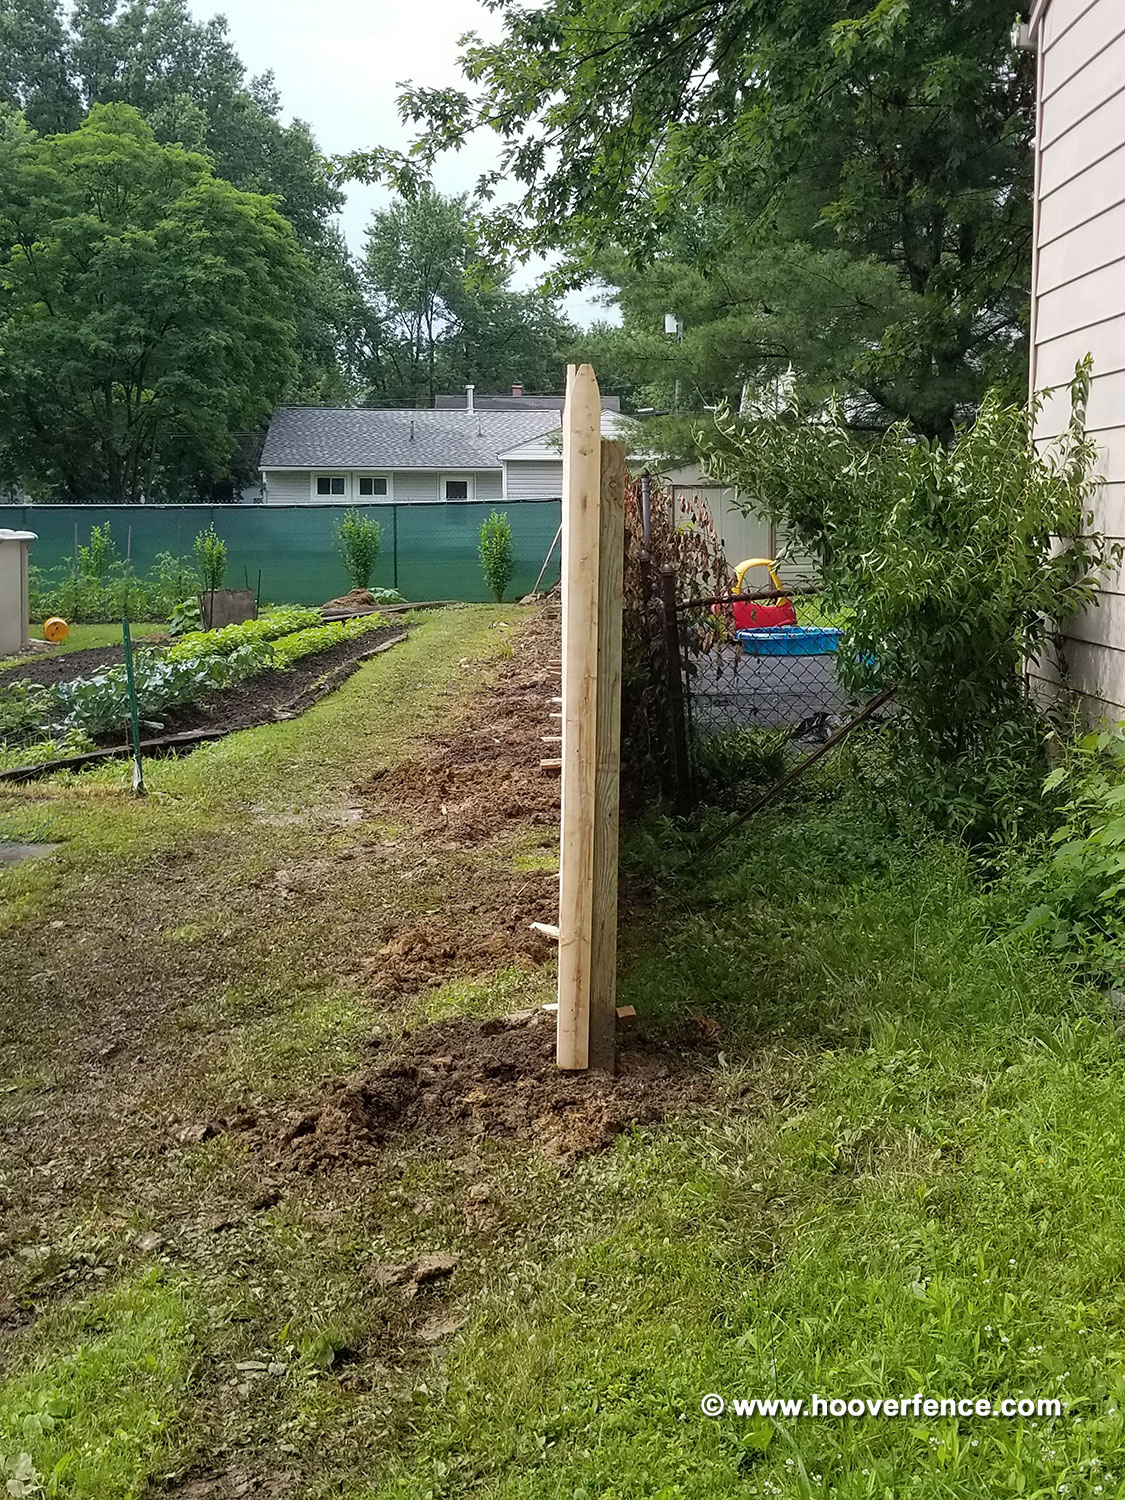 Hoover Fence Co Install - 6' High Spruce Stockade Privacy Fence Panels - Warren, Ohio - 2018